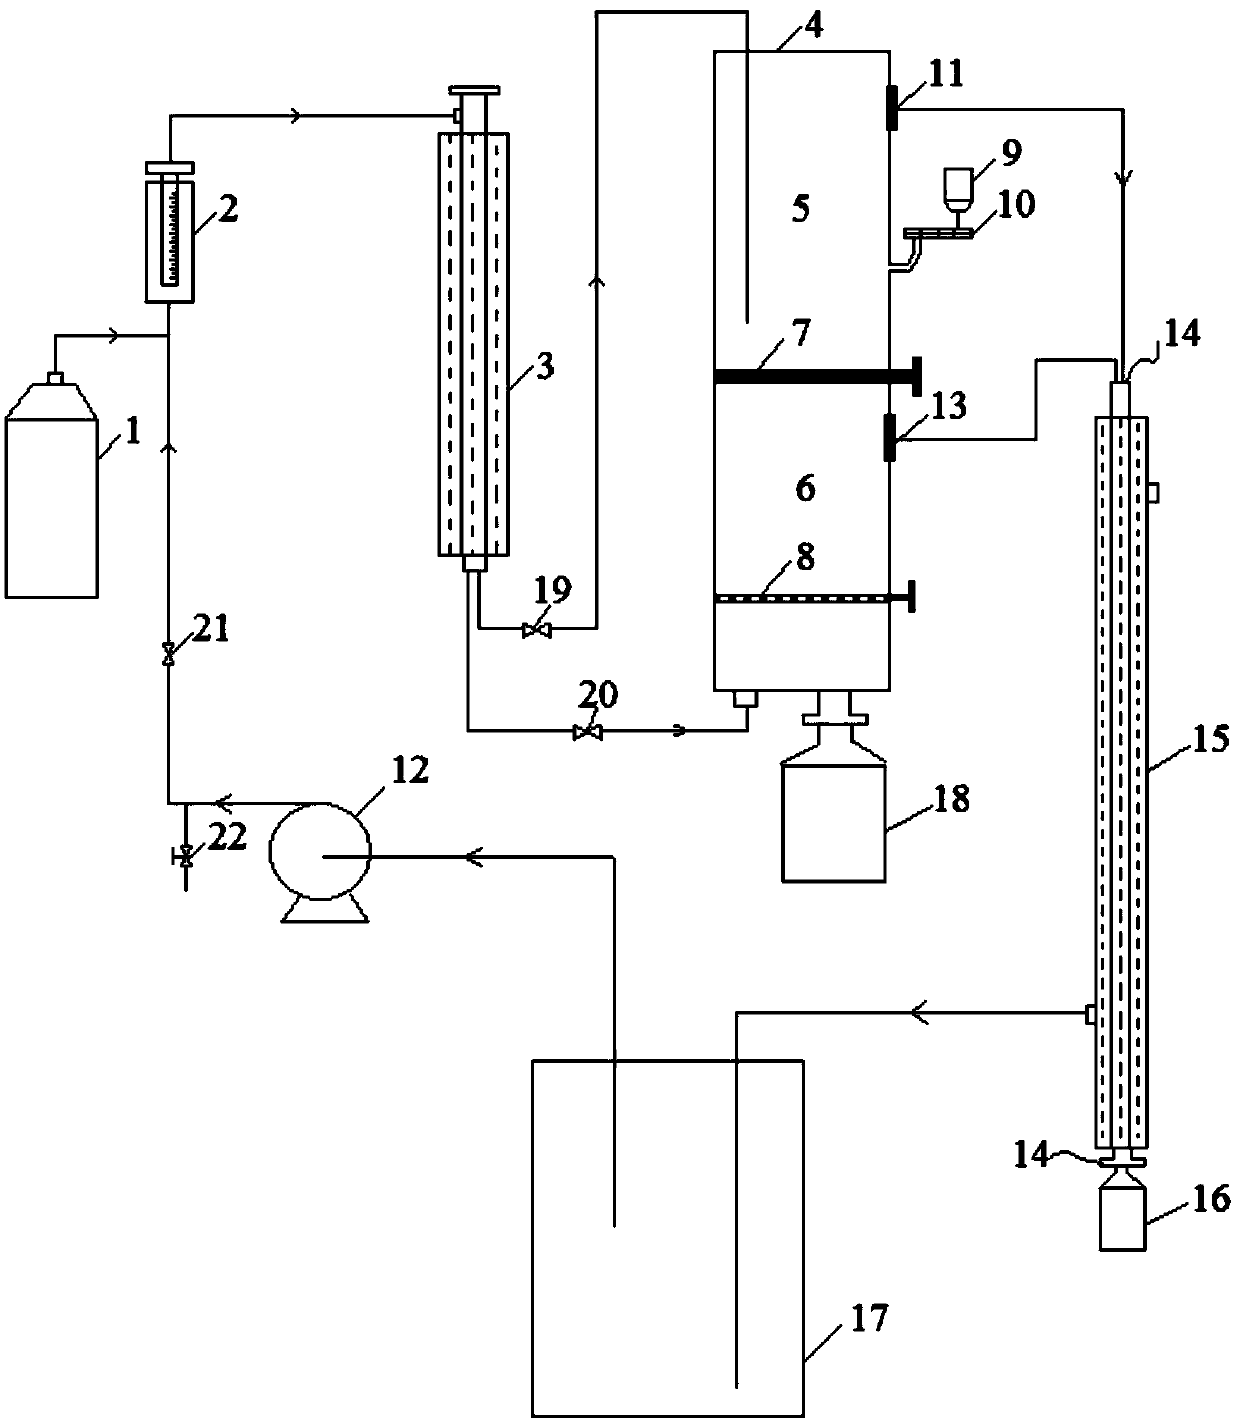 A kind of equipment and method for producing oil by staged cocatalytic pyrolysis of agricultural and forestry waste and seaweed